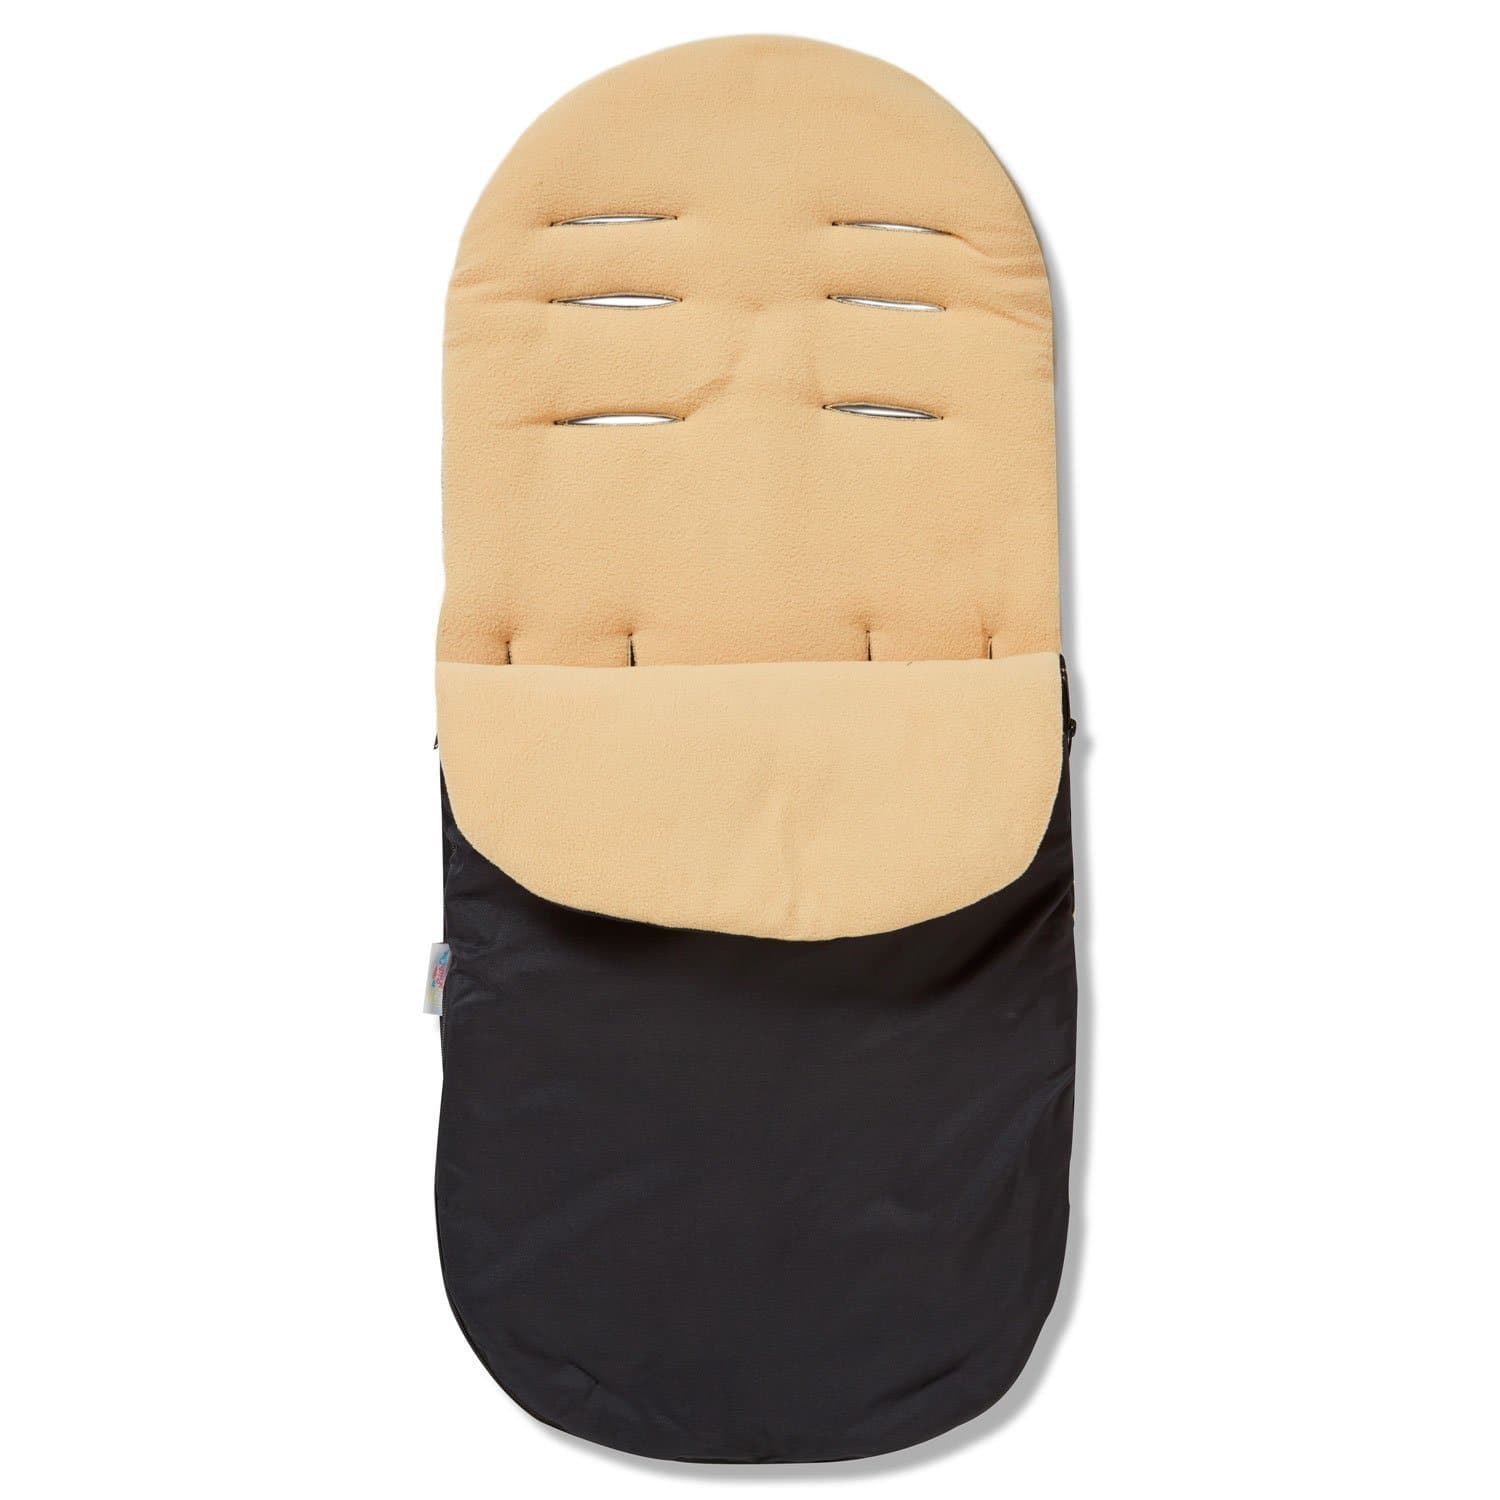 Footmuff / Cosy Toes Compatible with My Child - Sand / Fits All Models | For Your Little One